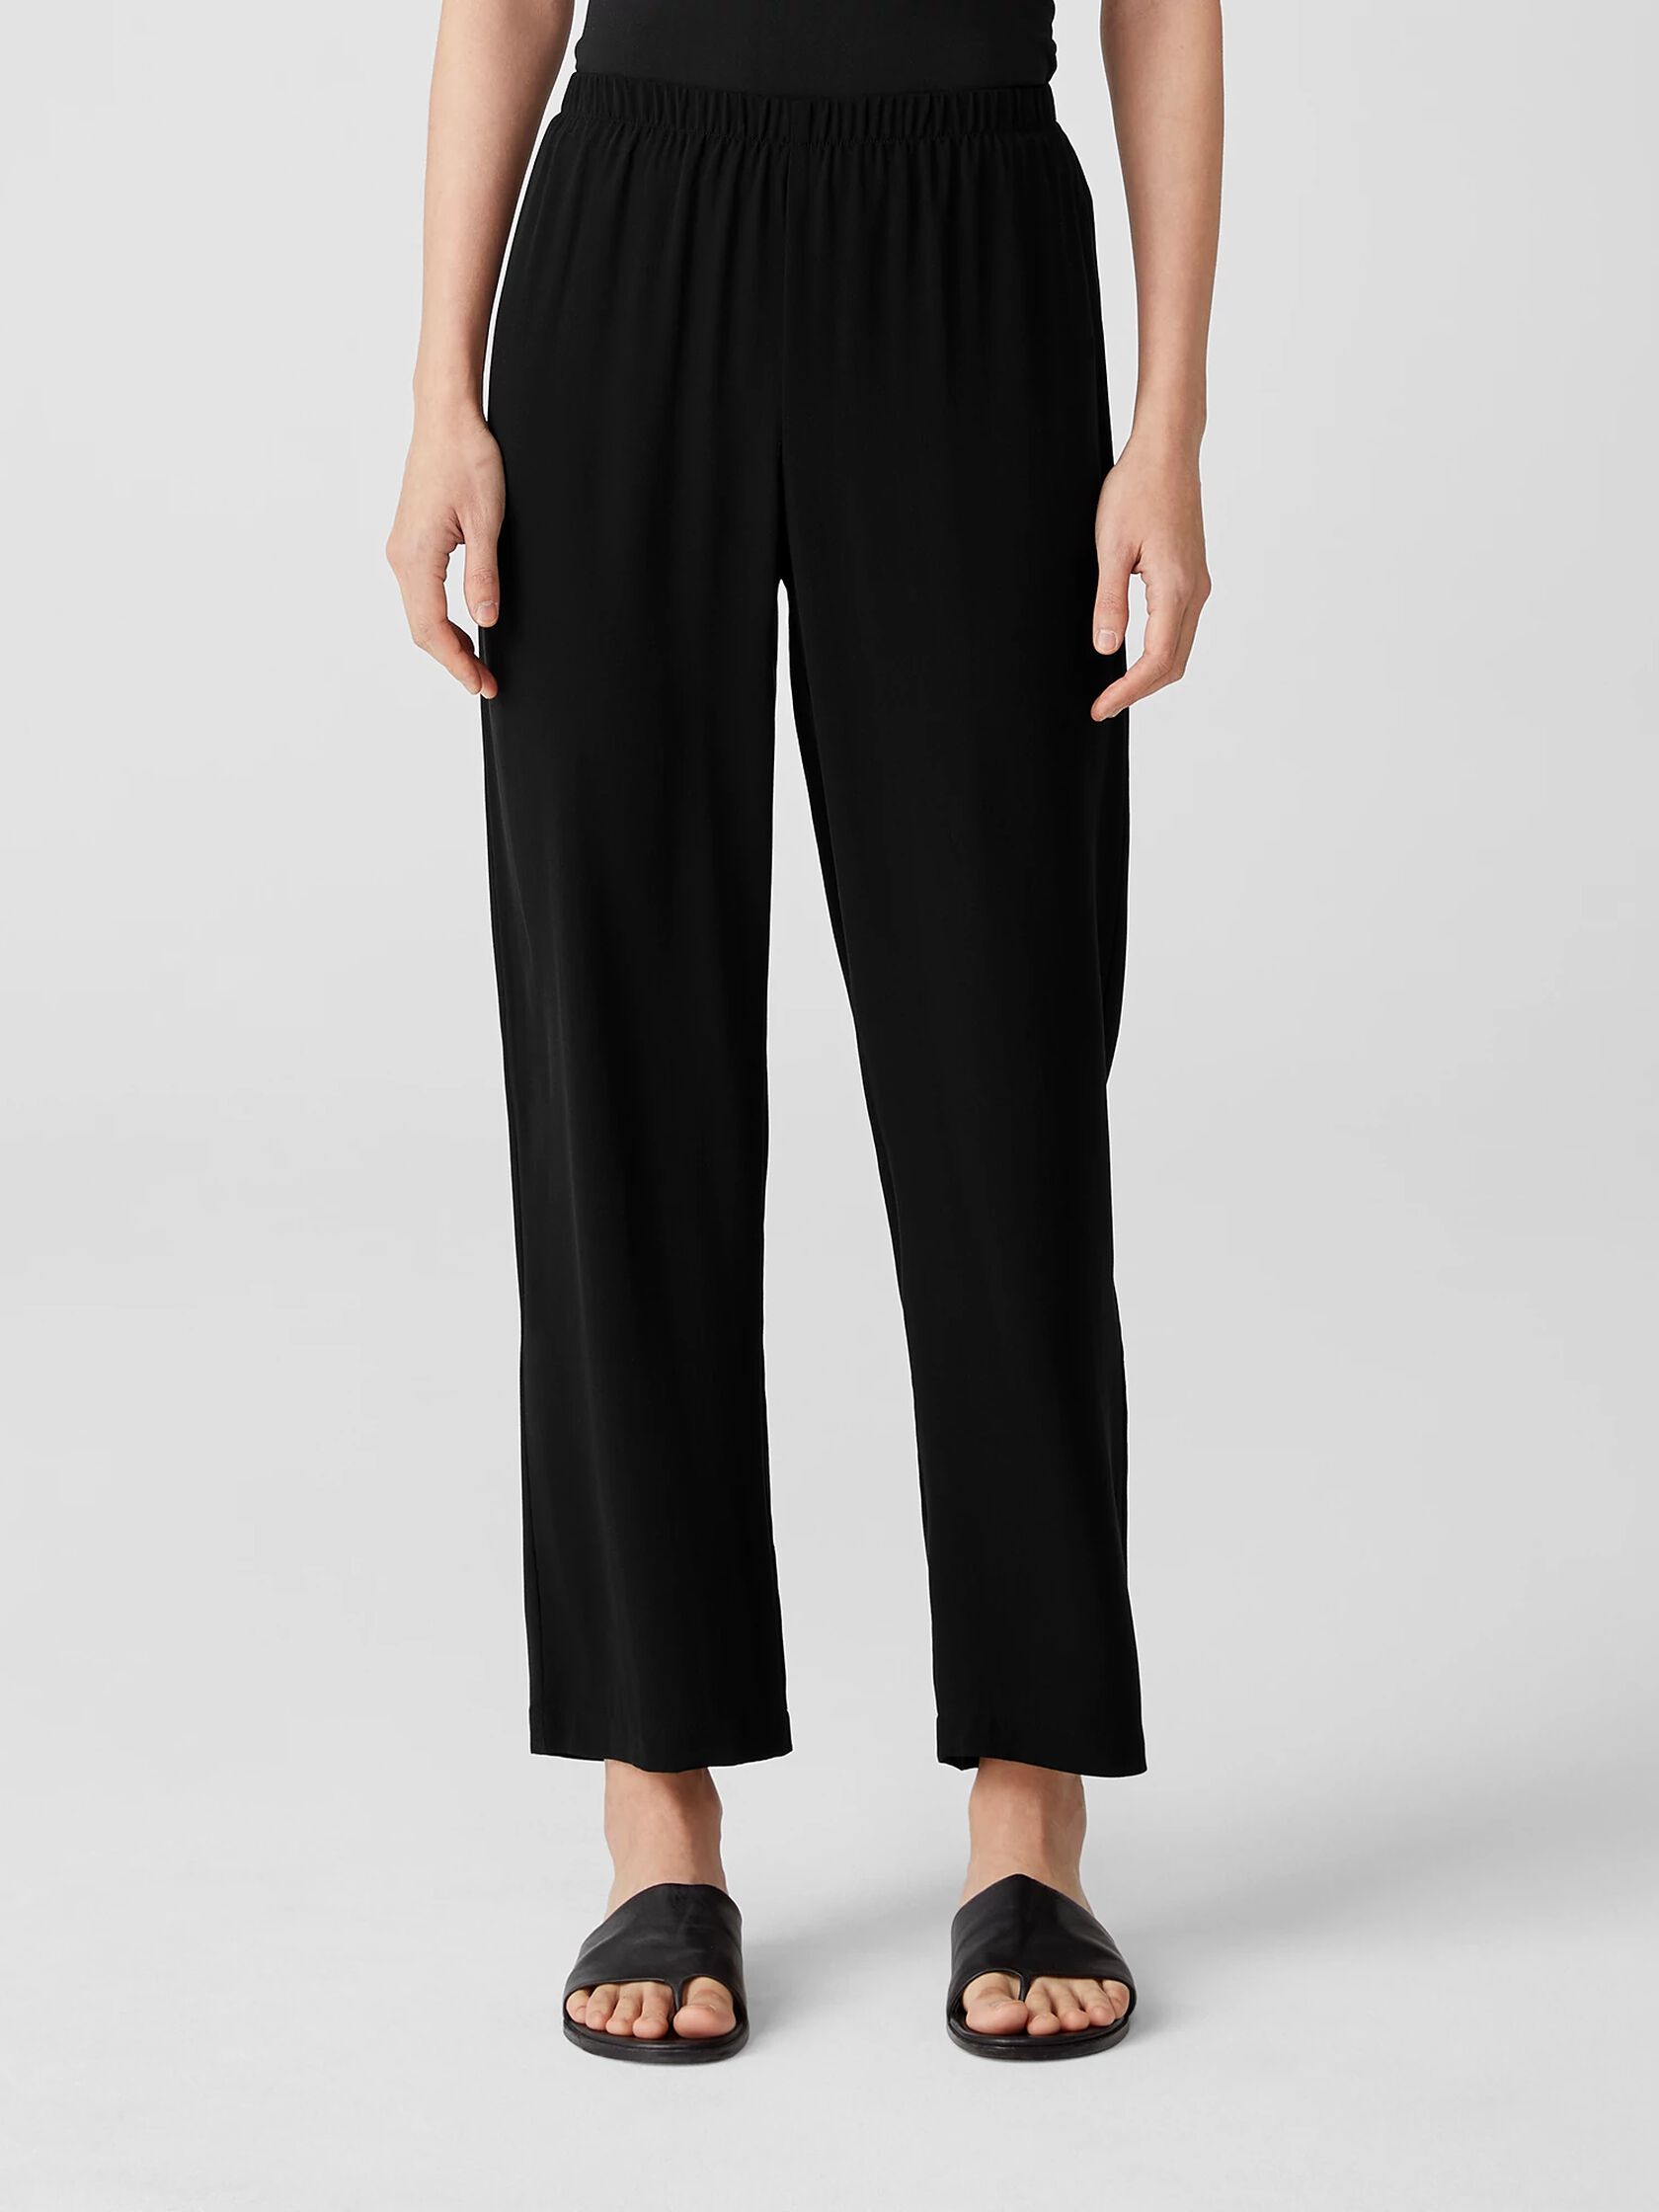 Silk Georgette Crepe Straight Pant | EILEEN FISHER